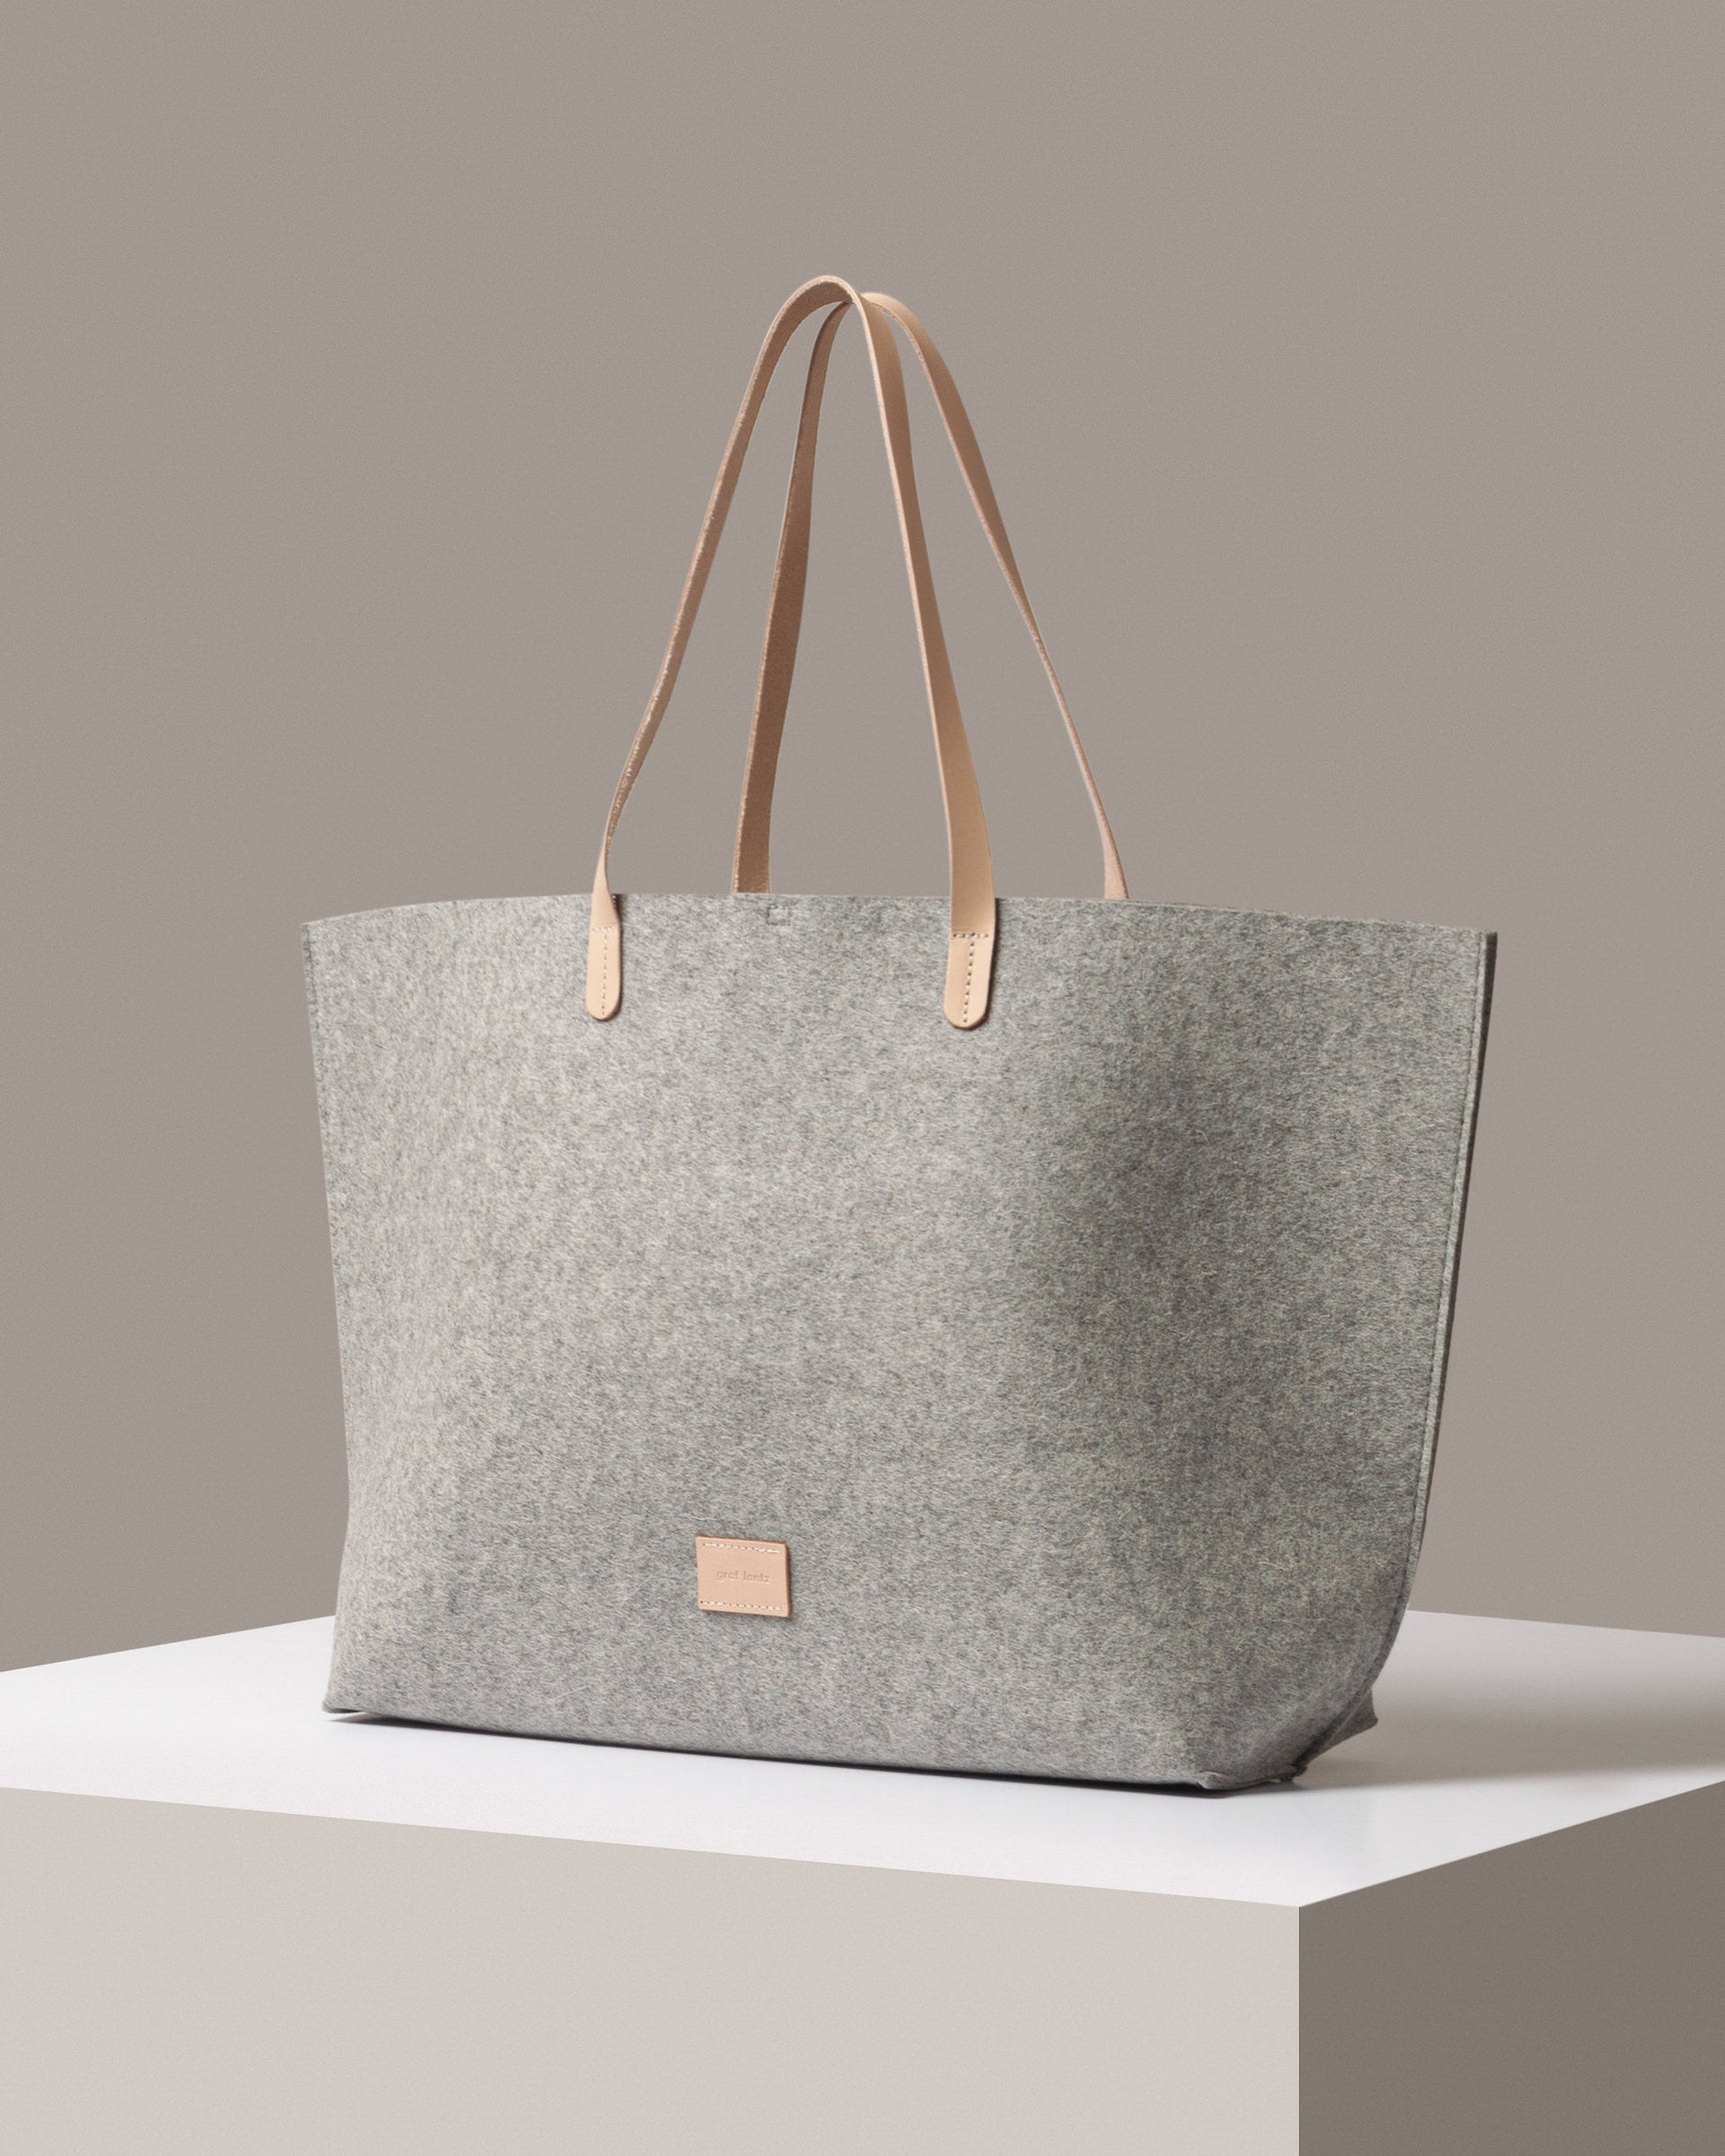 A stylish Hana Merino Wool Felt Boat Bag in gray with beige leather handles, displayed in a three-quarter view on a white base